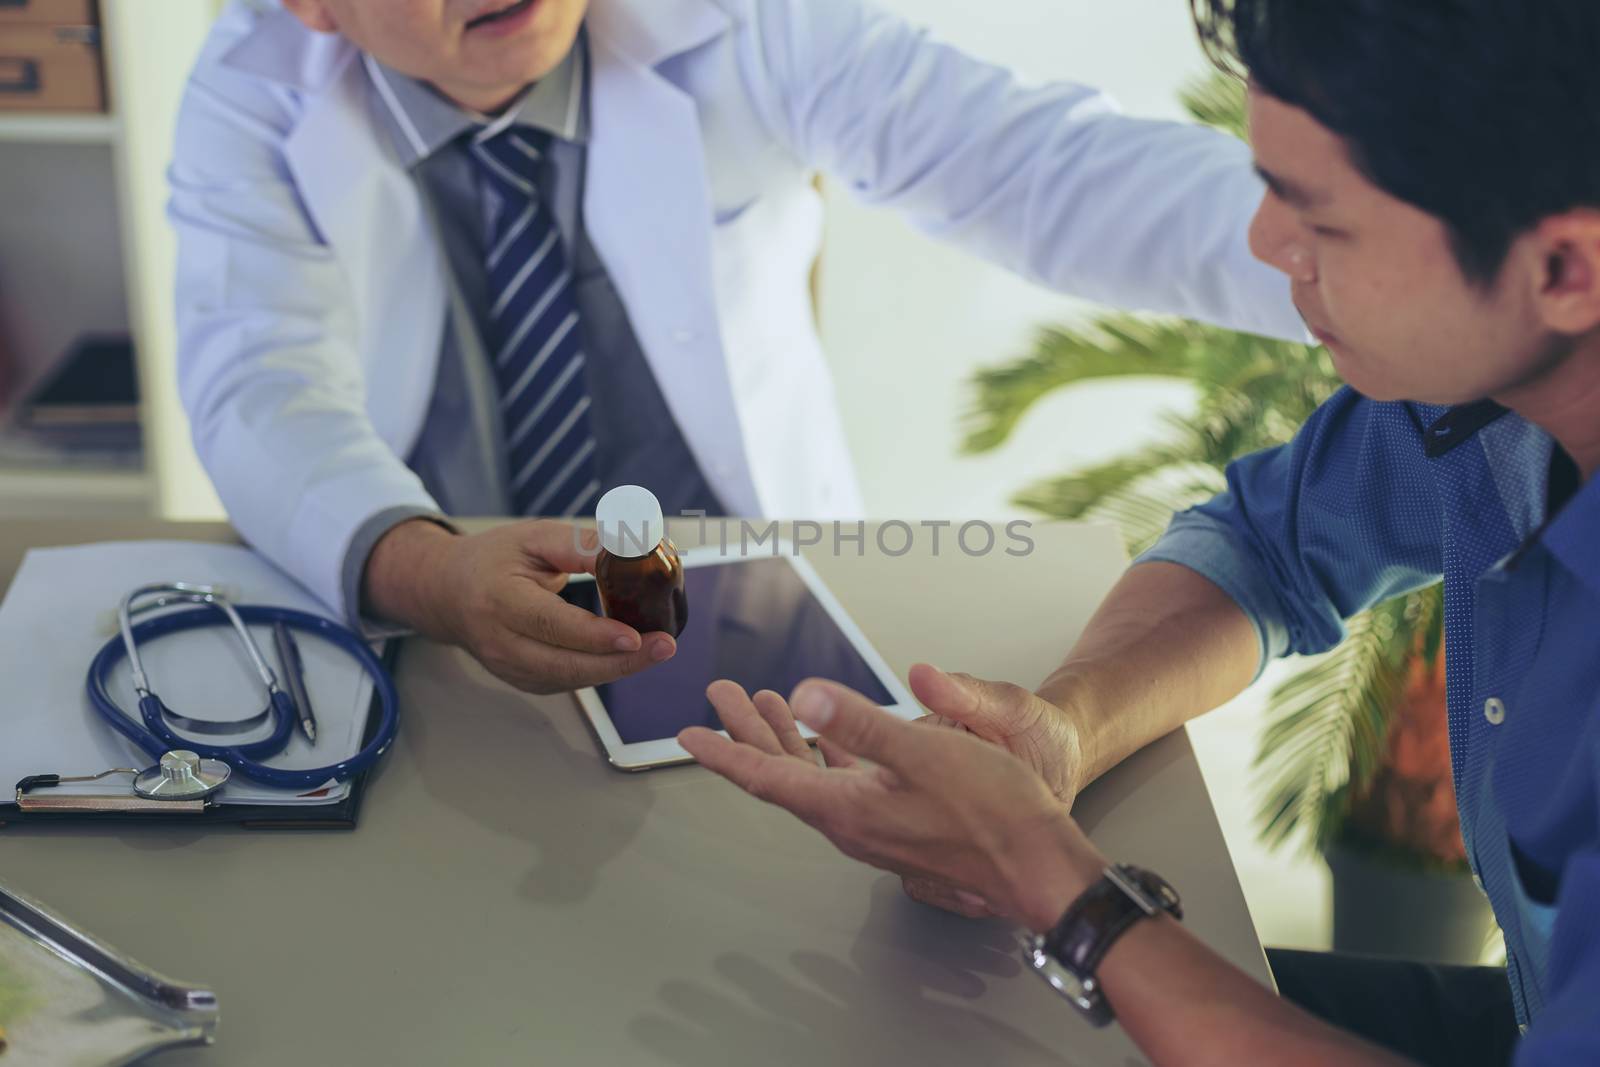 The doctor is explaining something about the medicine to the patient, in order to understand how to use it and to know the benefits and penalties of the drug.